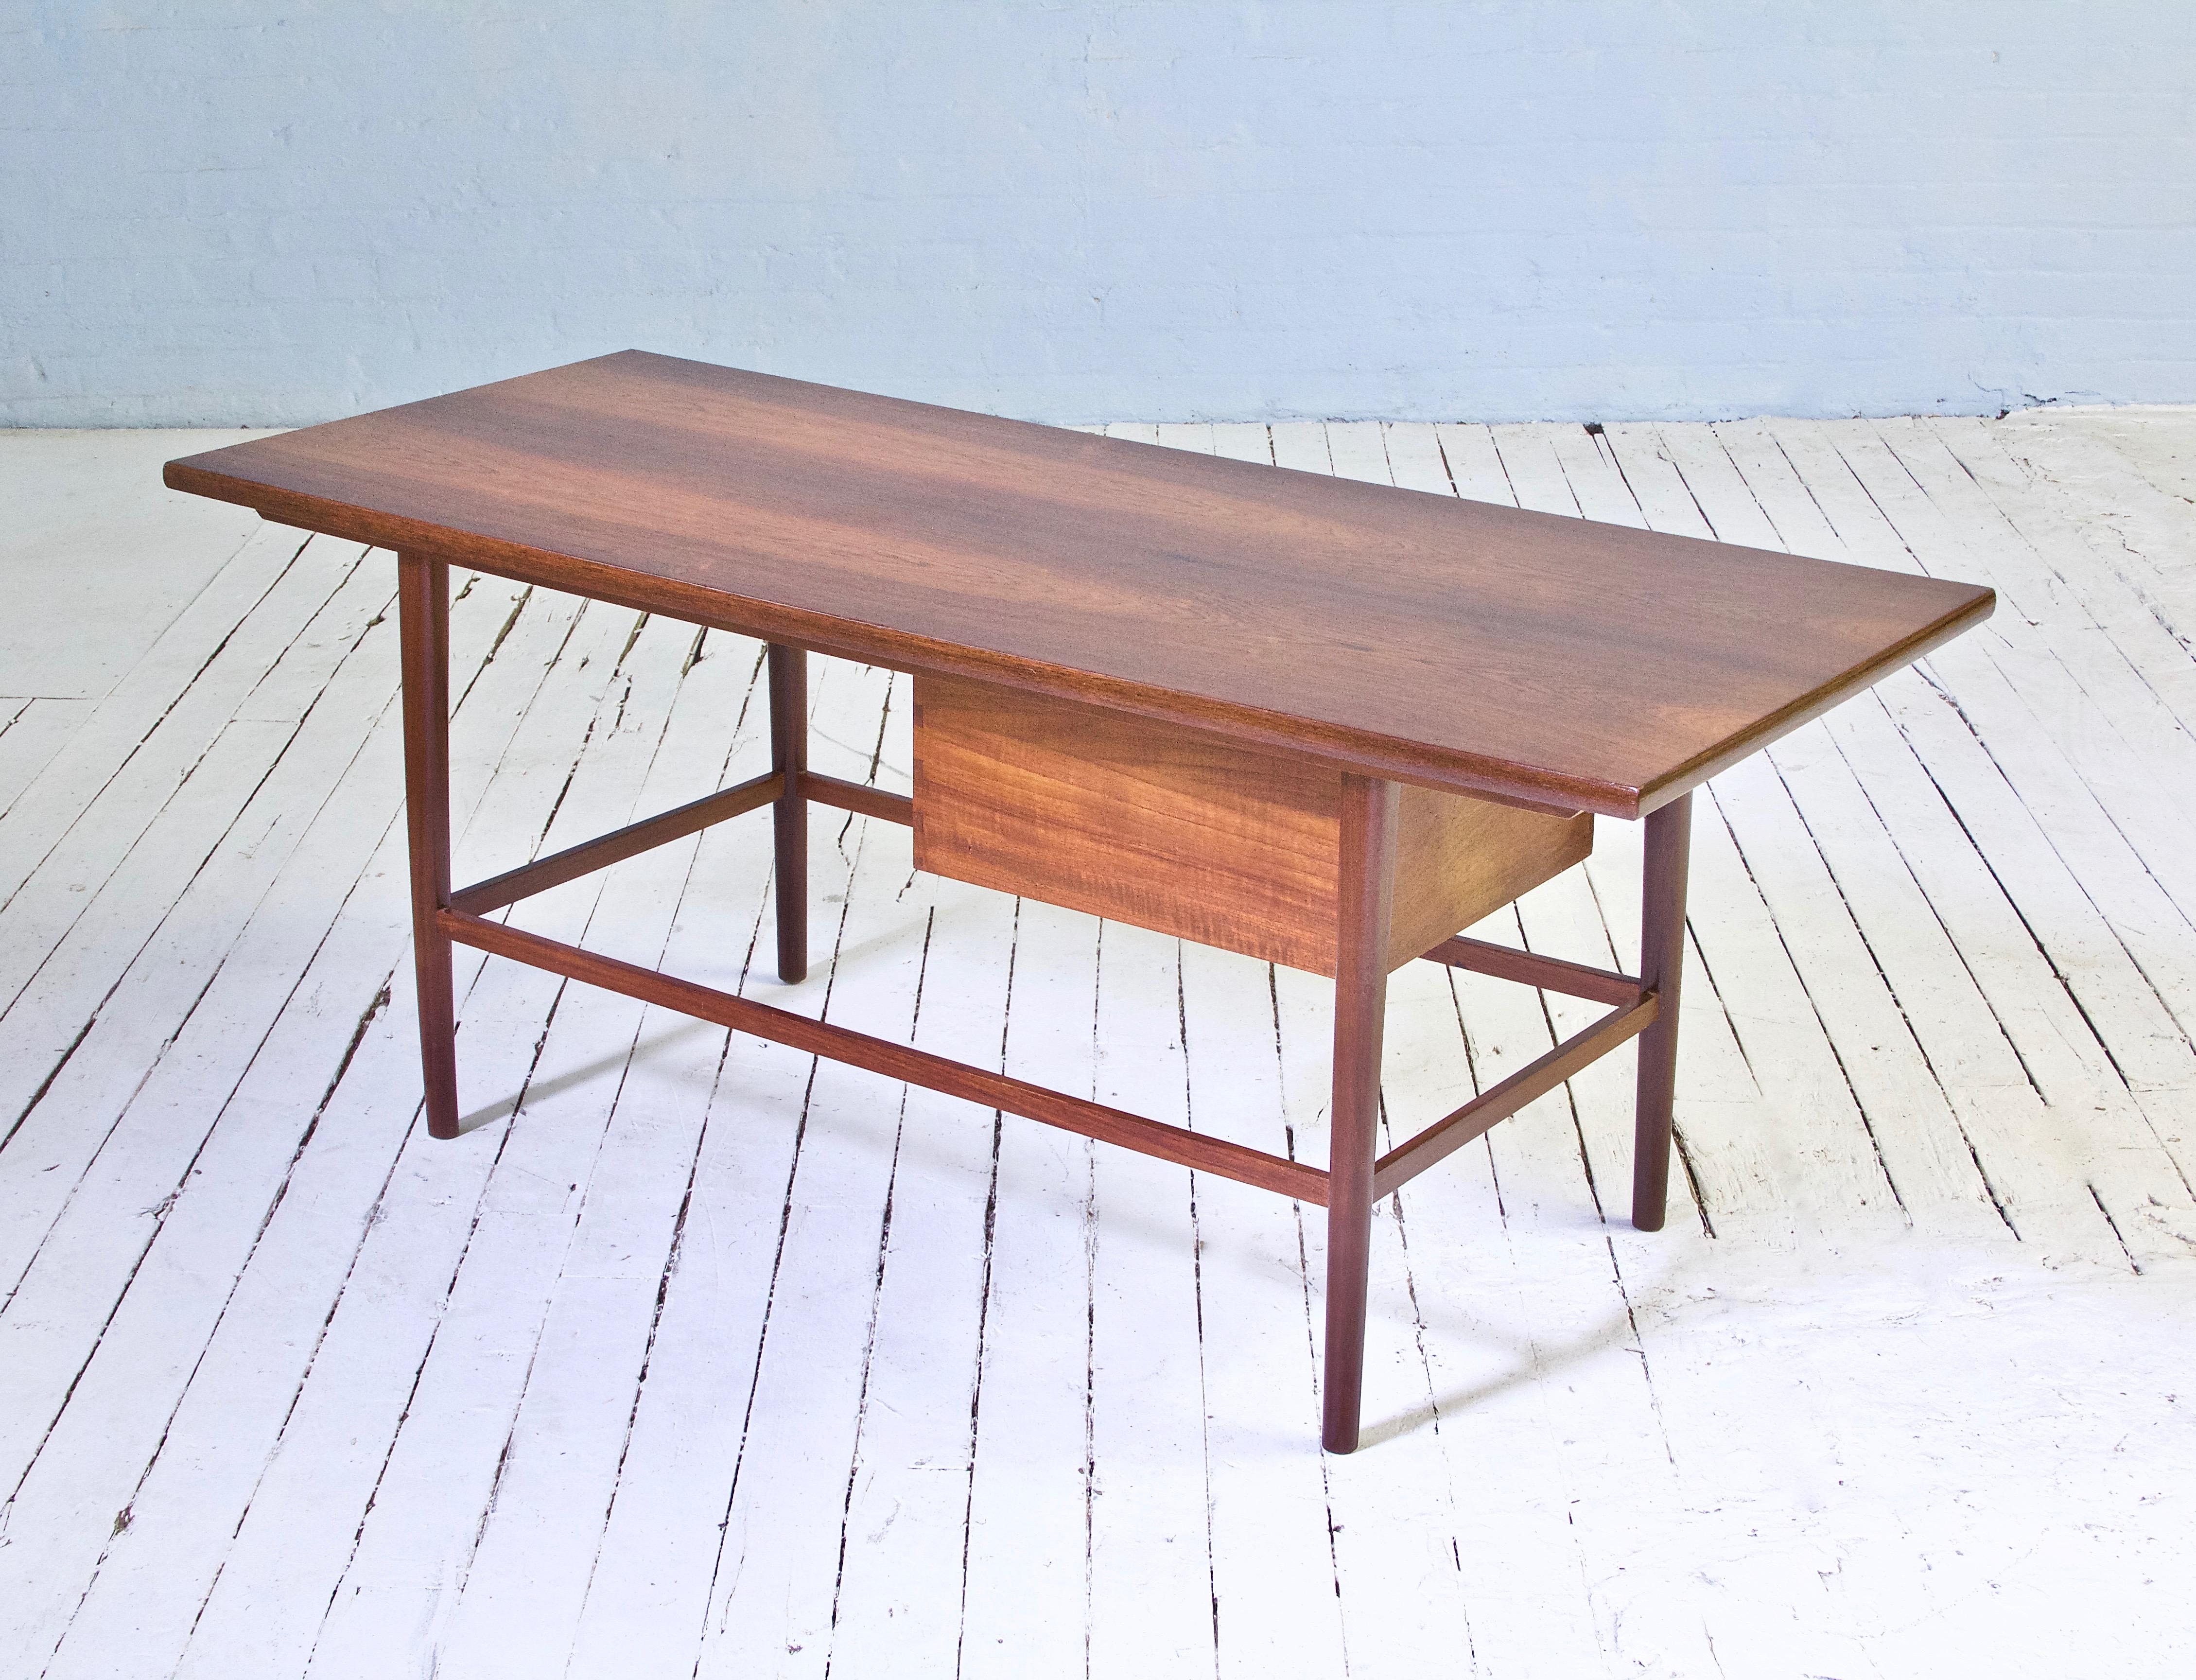 Attractive Norwegian modern cocktail table featuring a richly colored book-matched rosewood top supported by round tapered legs joined by rectangular stretchers. This unique table has a 